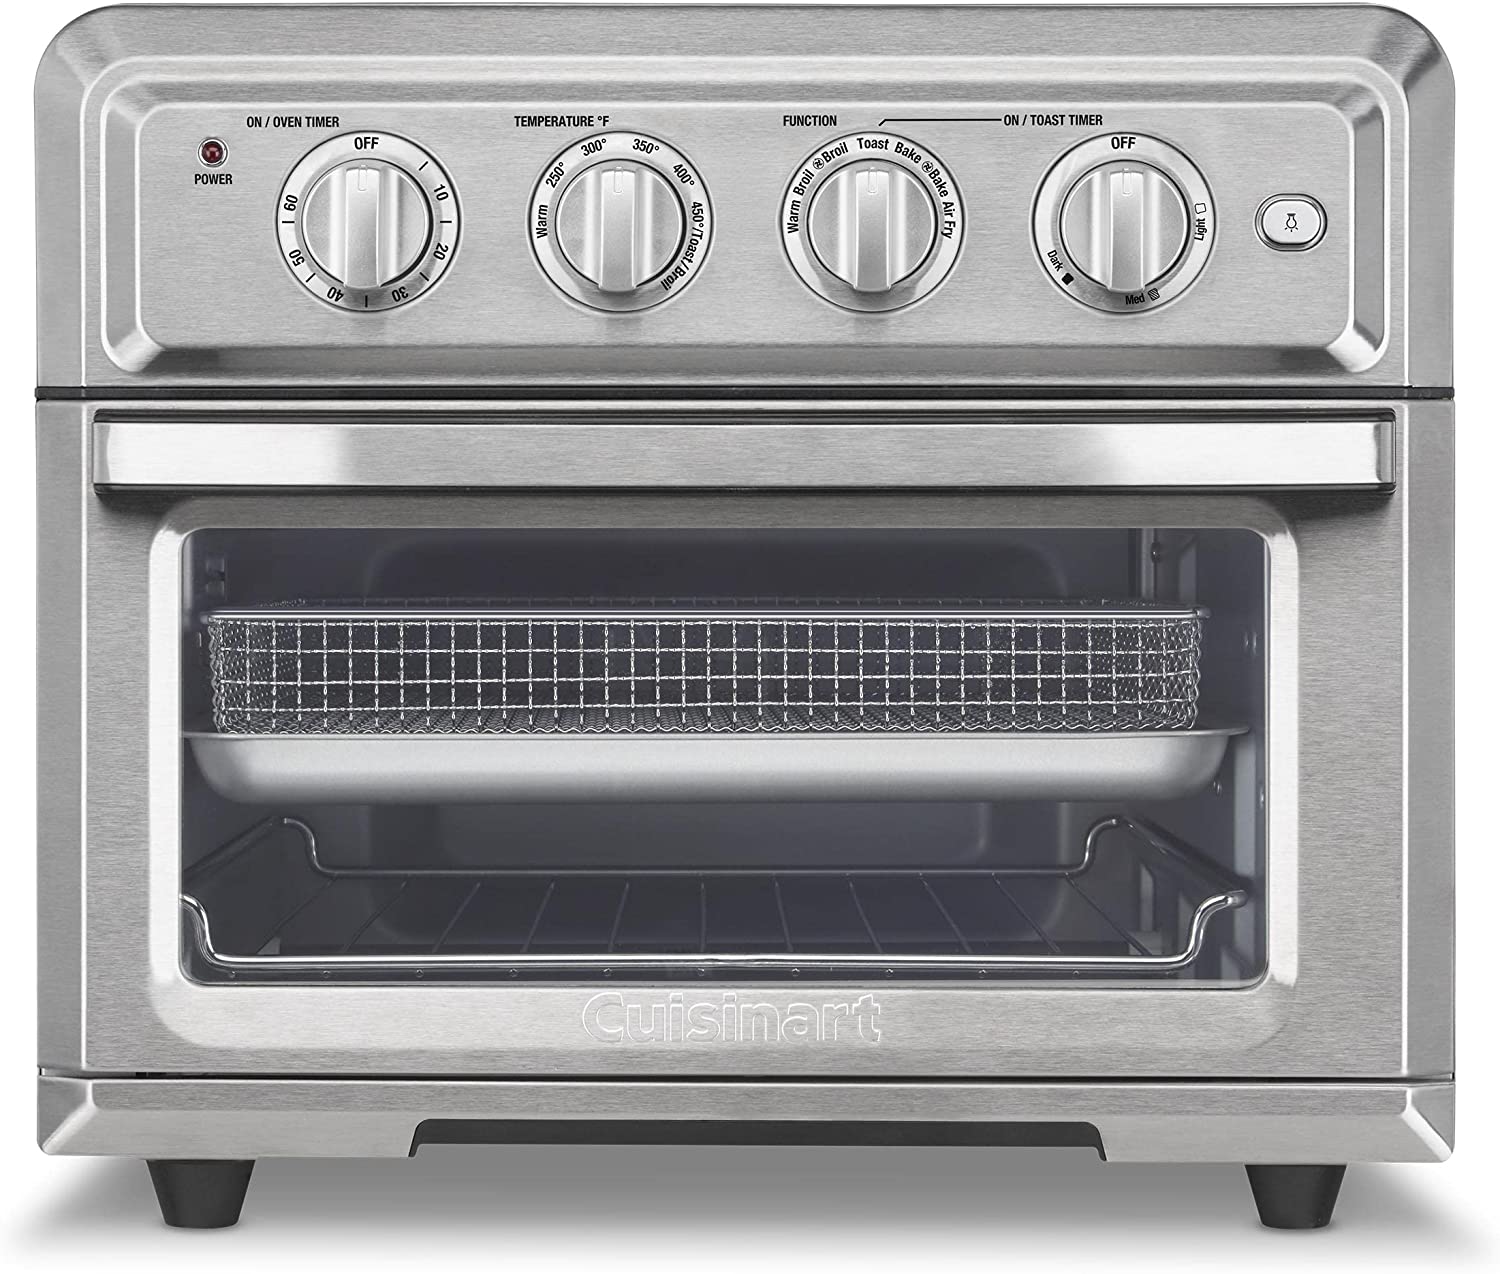 Cuisinart TOA-60 Stainless Steel AirFryer/Toaster Convection Oven $130 + Free S/H at Amazon